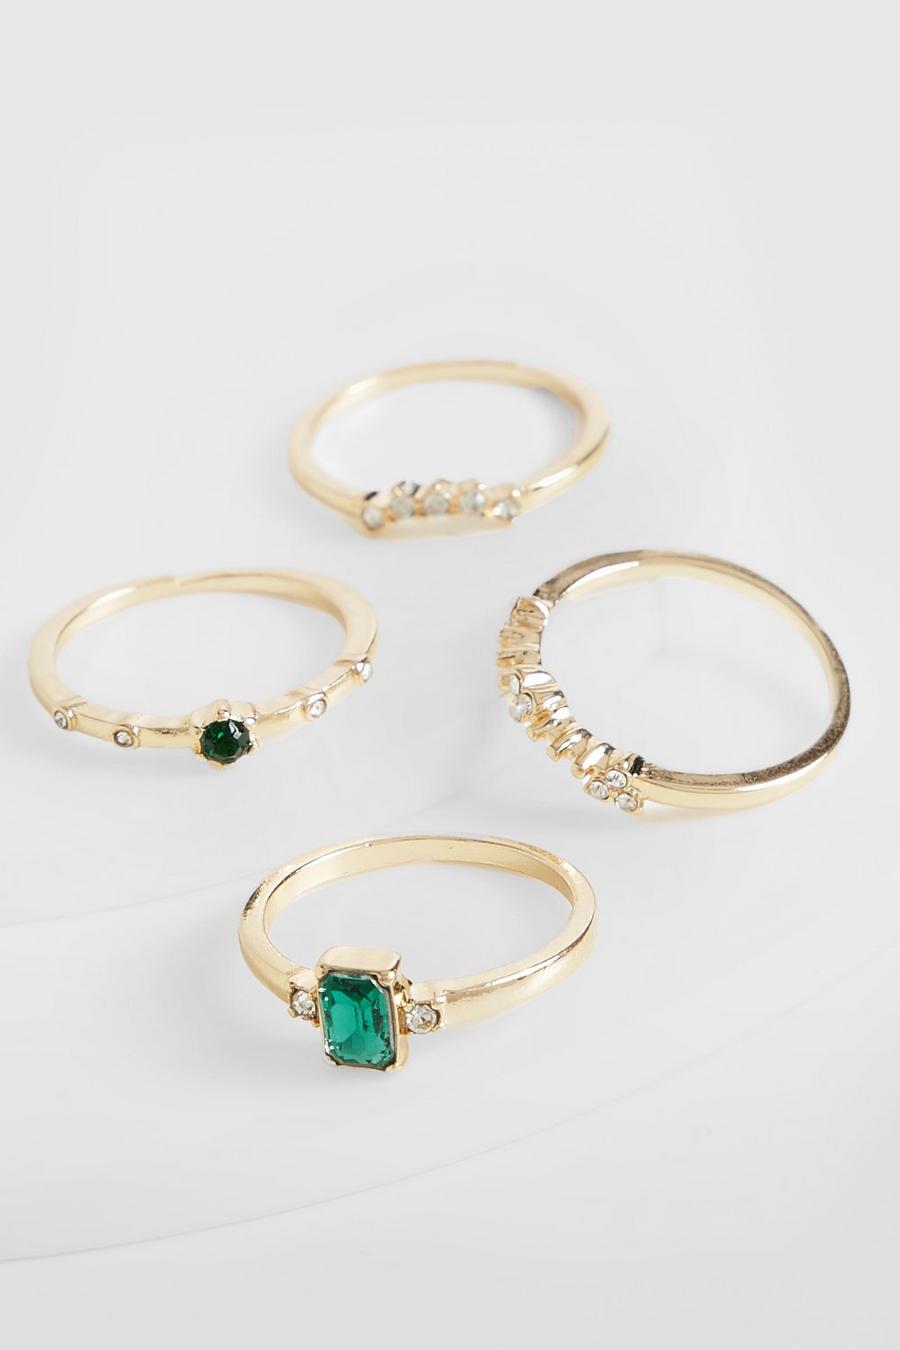 Emerald Cut Embellished Stackable Rings 